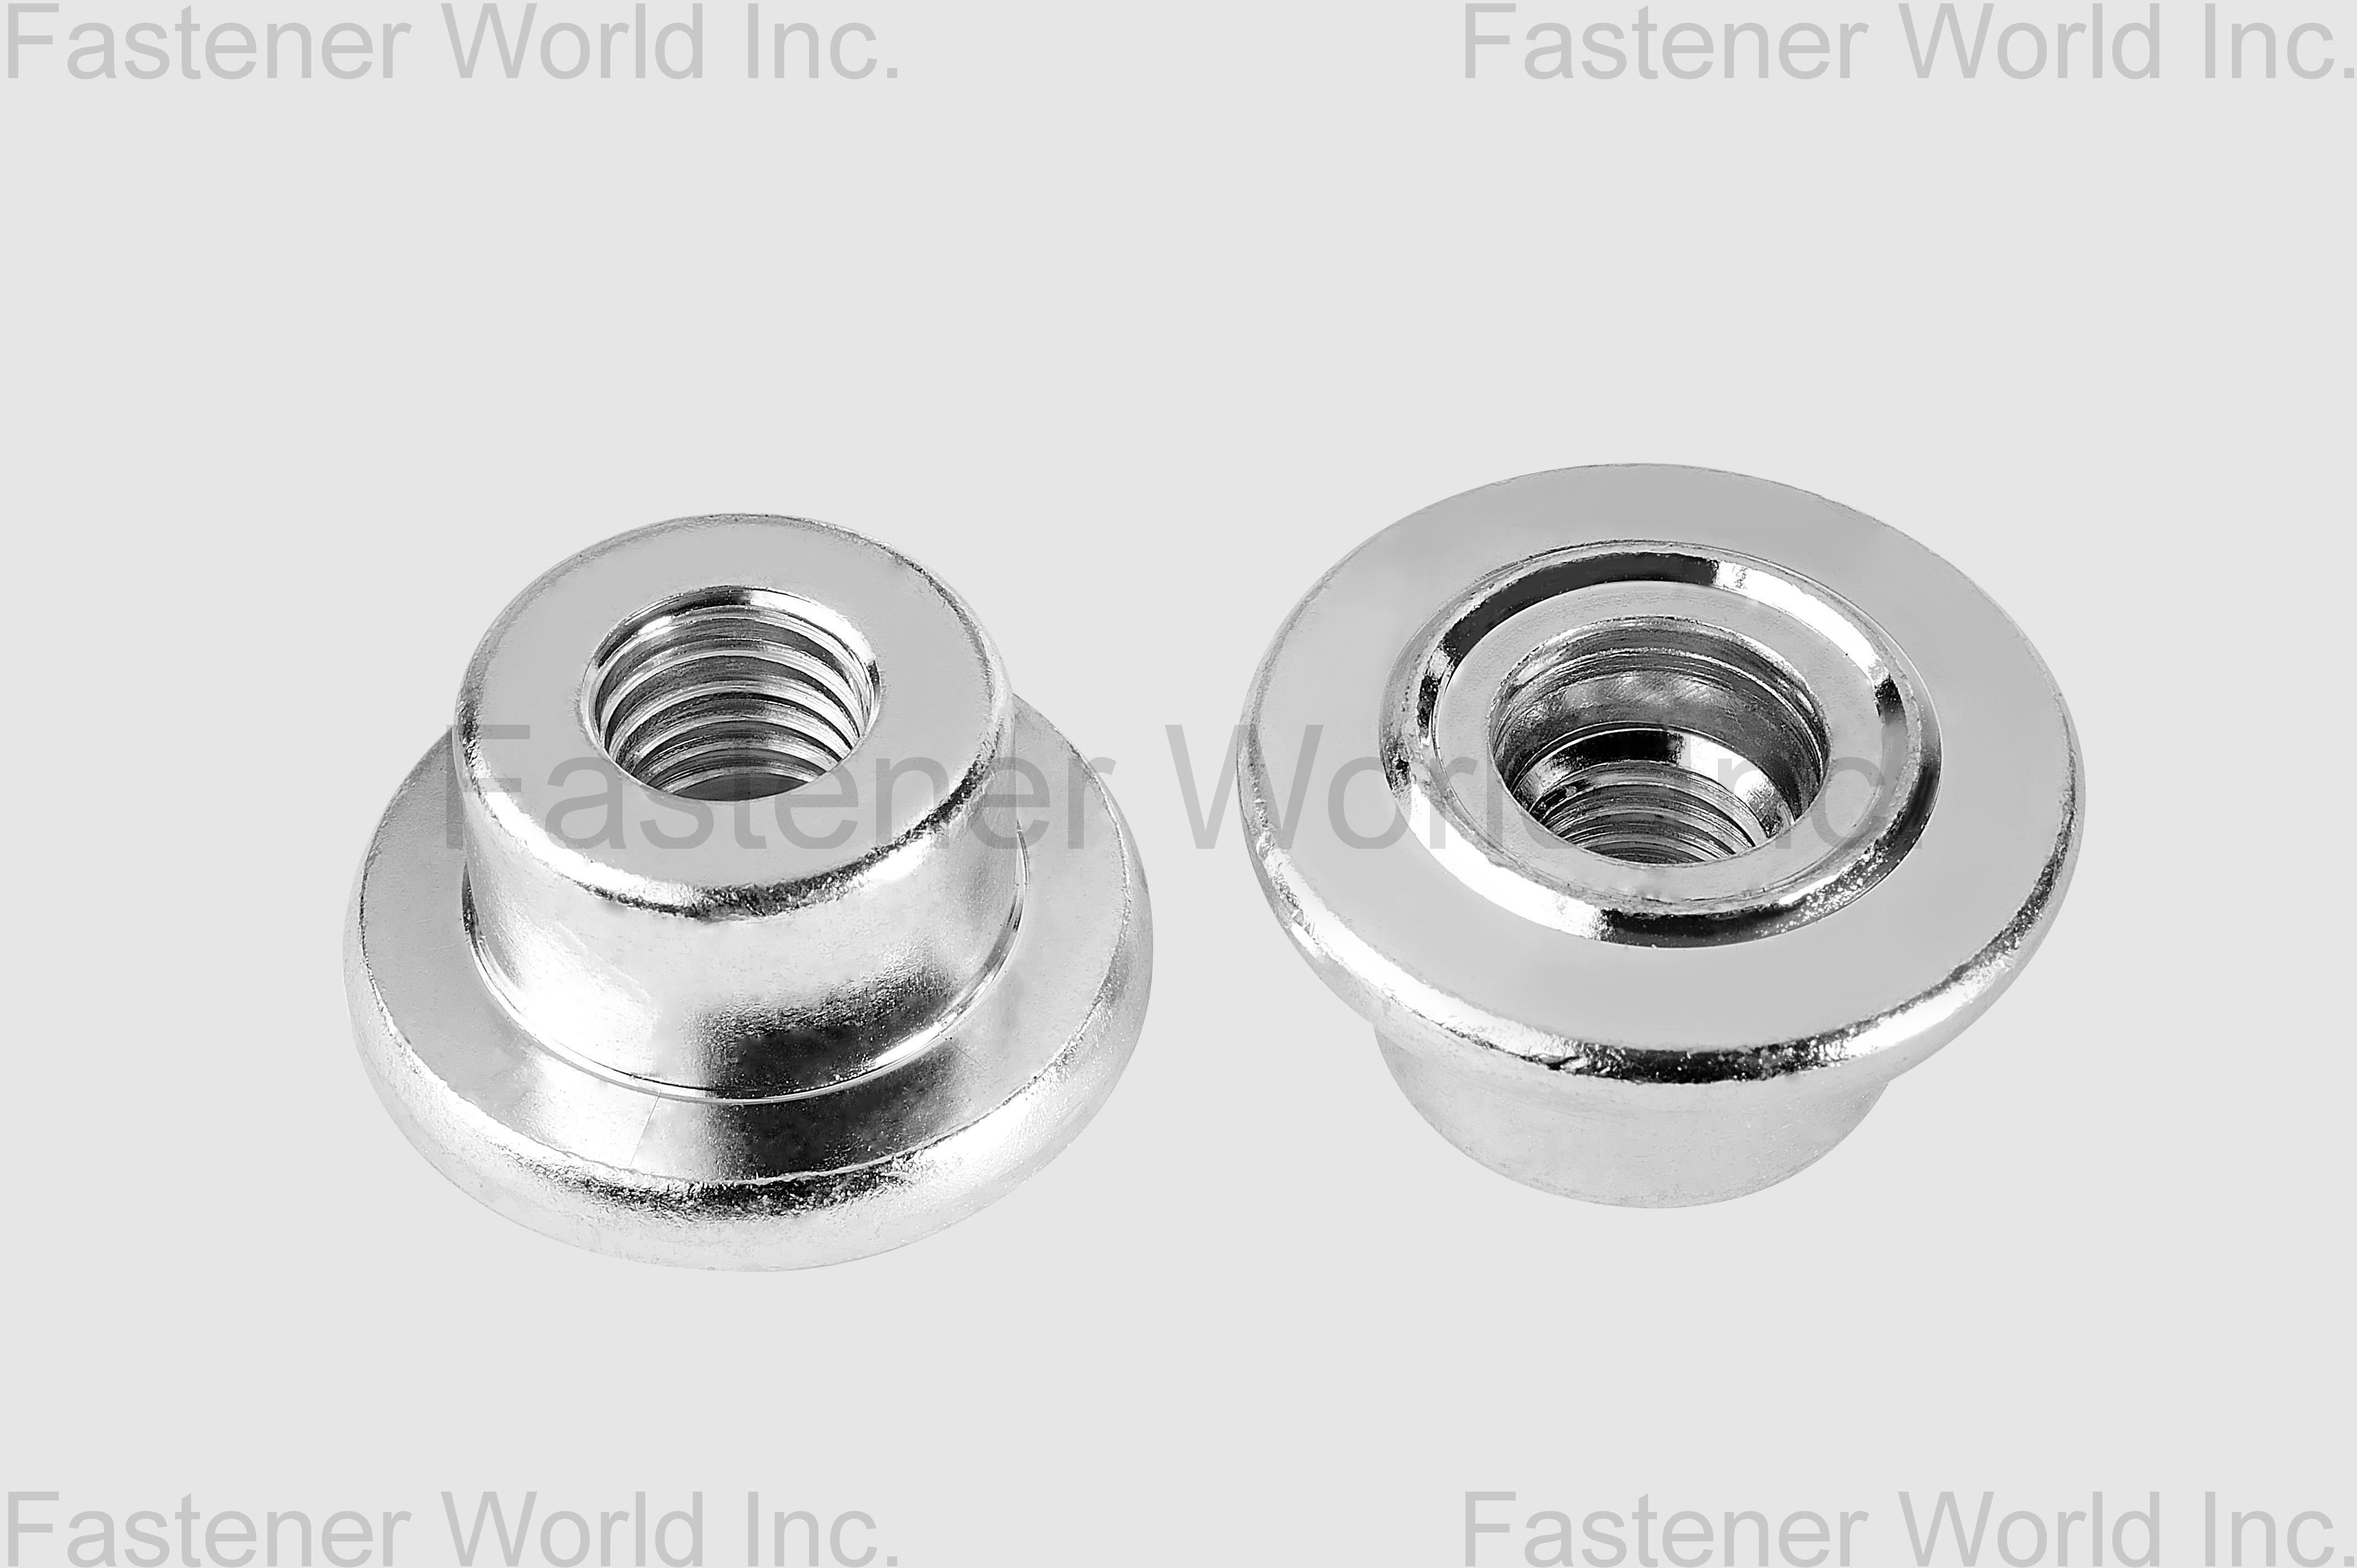 COPA FLANGE FASTENERS CORP. , ROUND NUT , Weld Nuts